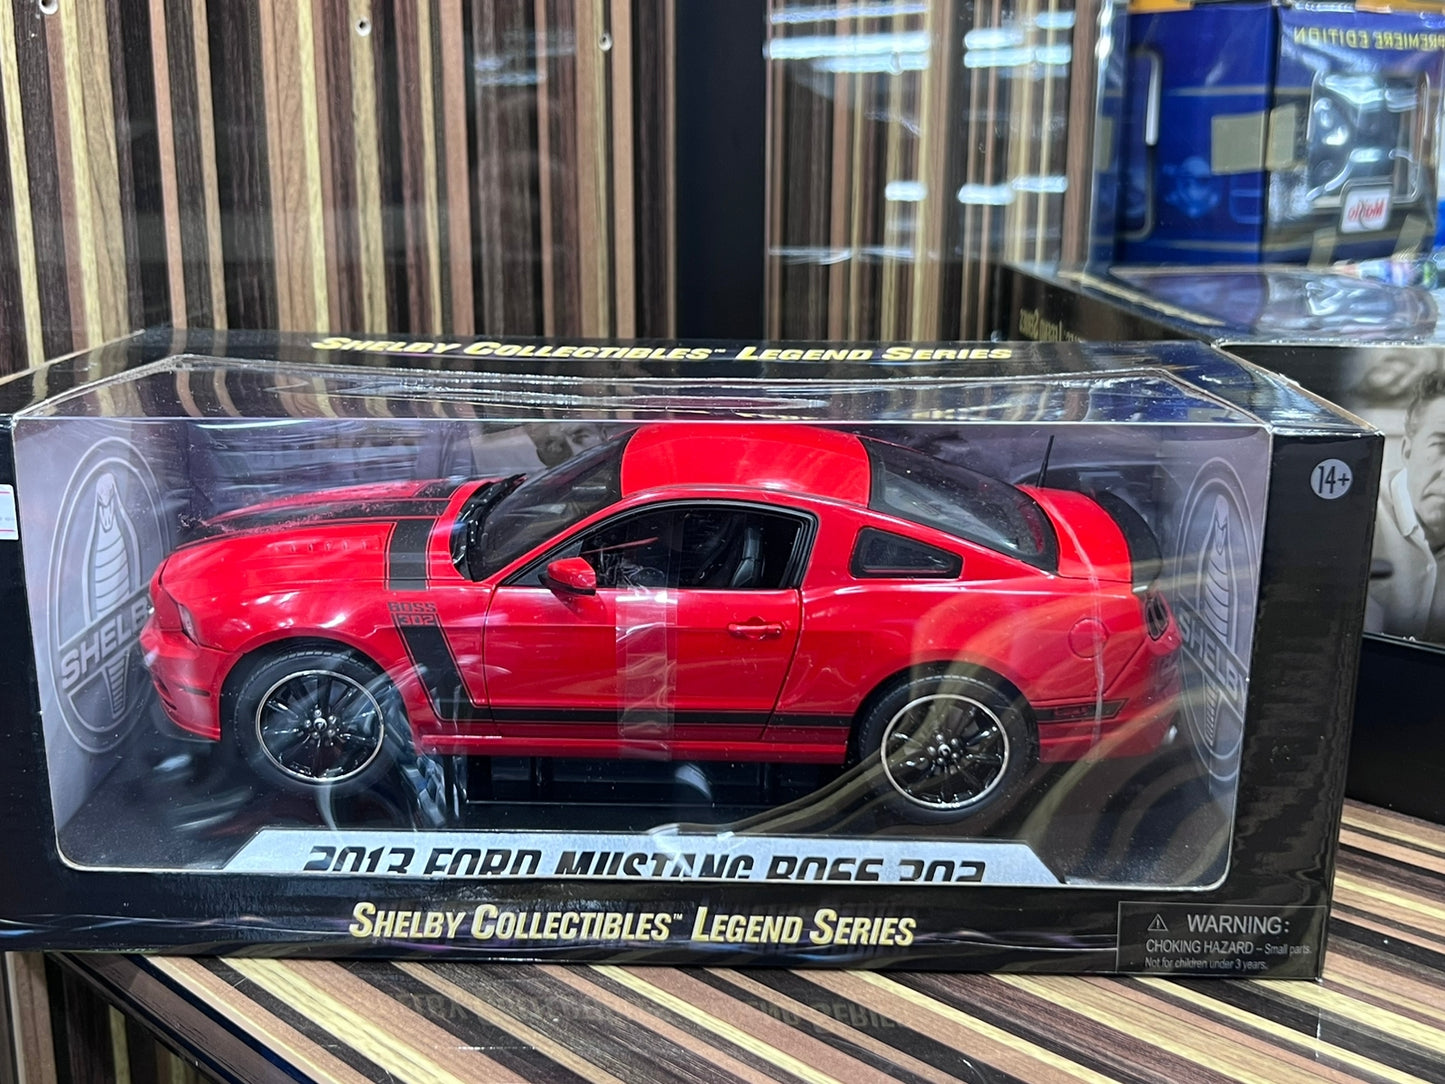 1/18 Diecast Ford Mustang BOSS 302 Red Model Car - Shelby Legend